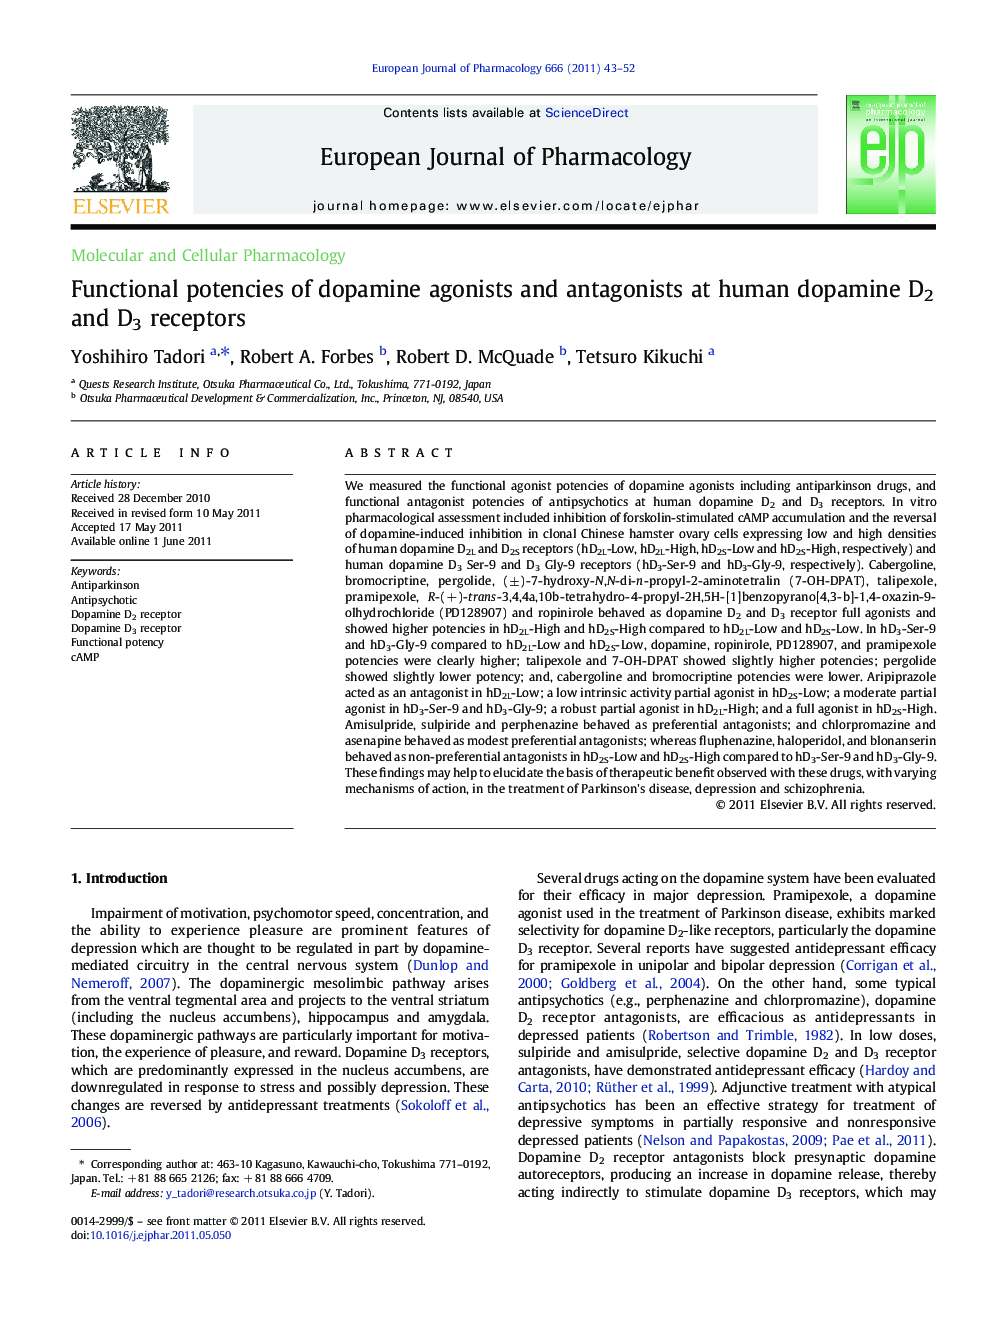 Functional potencies of dopamine agonists and antagonists at human dopamine D2 and D3 receptors